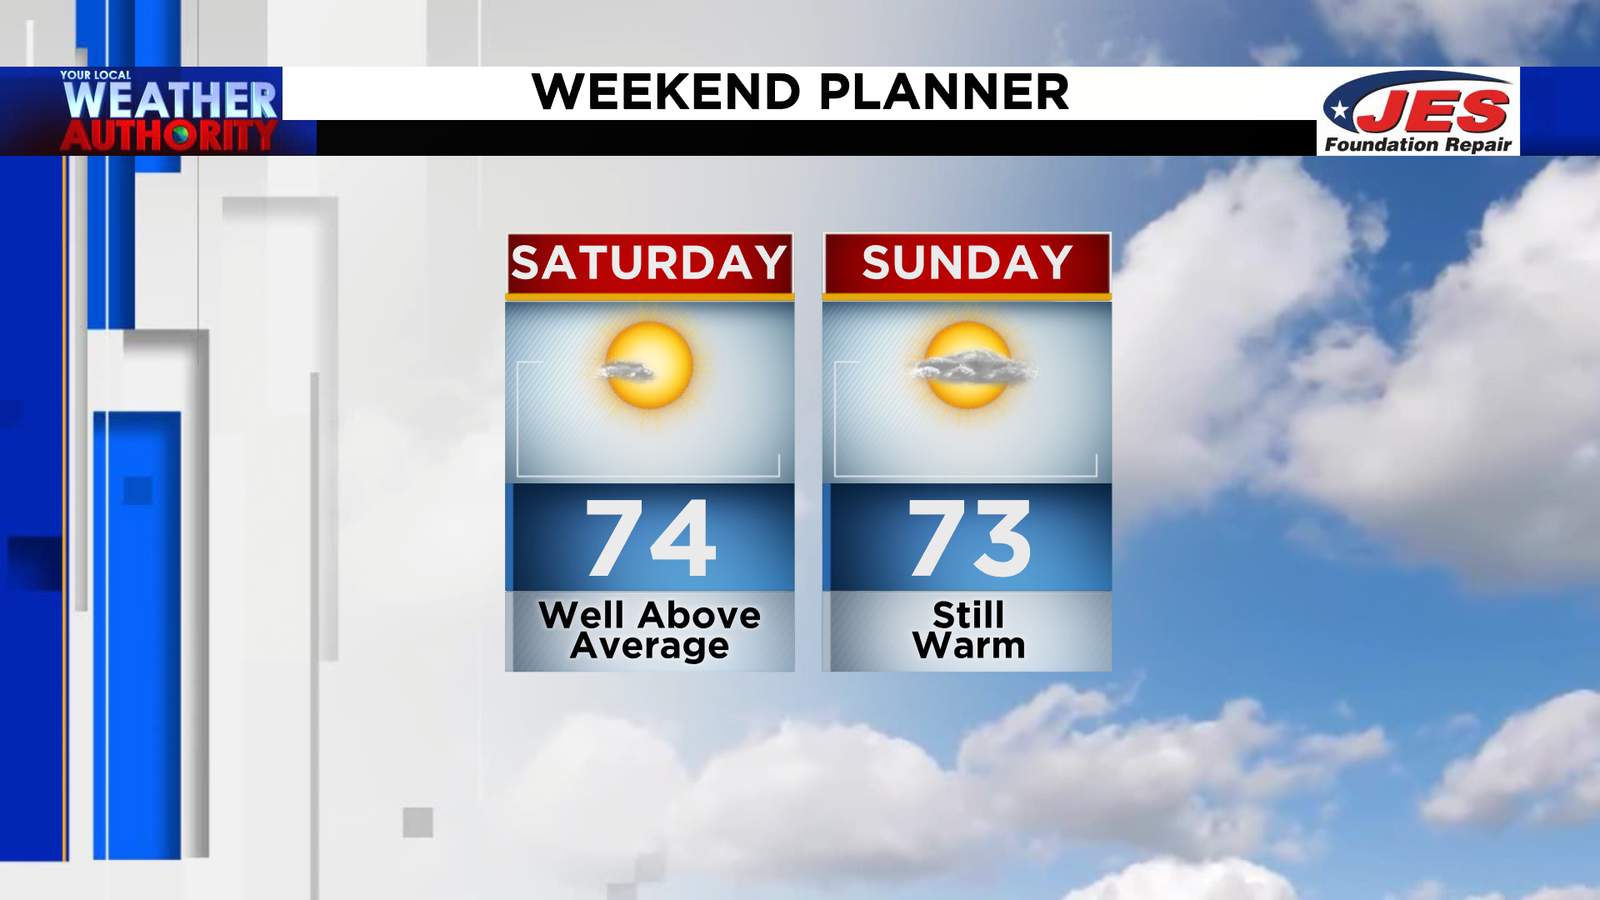 Enjoy the nice weekend weather because a pattern shift is expected next week